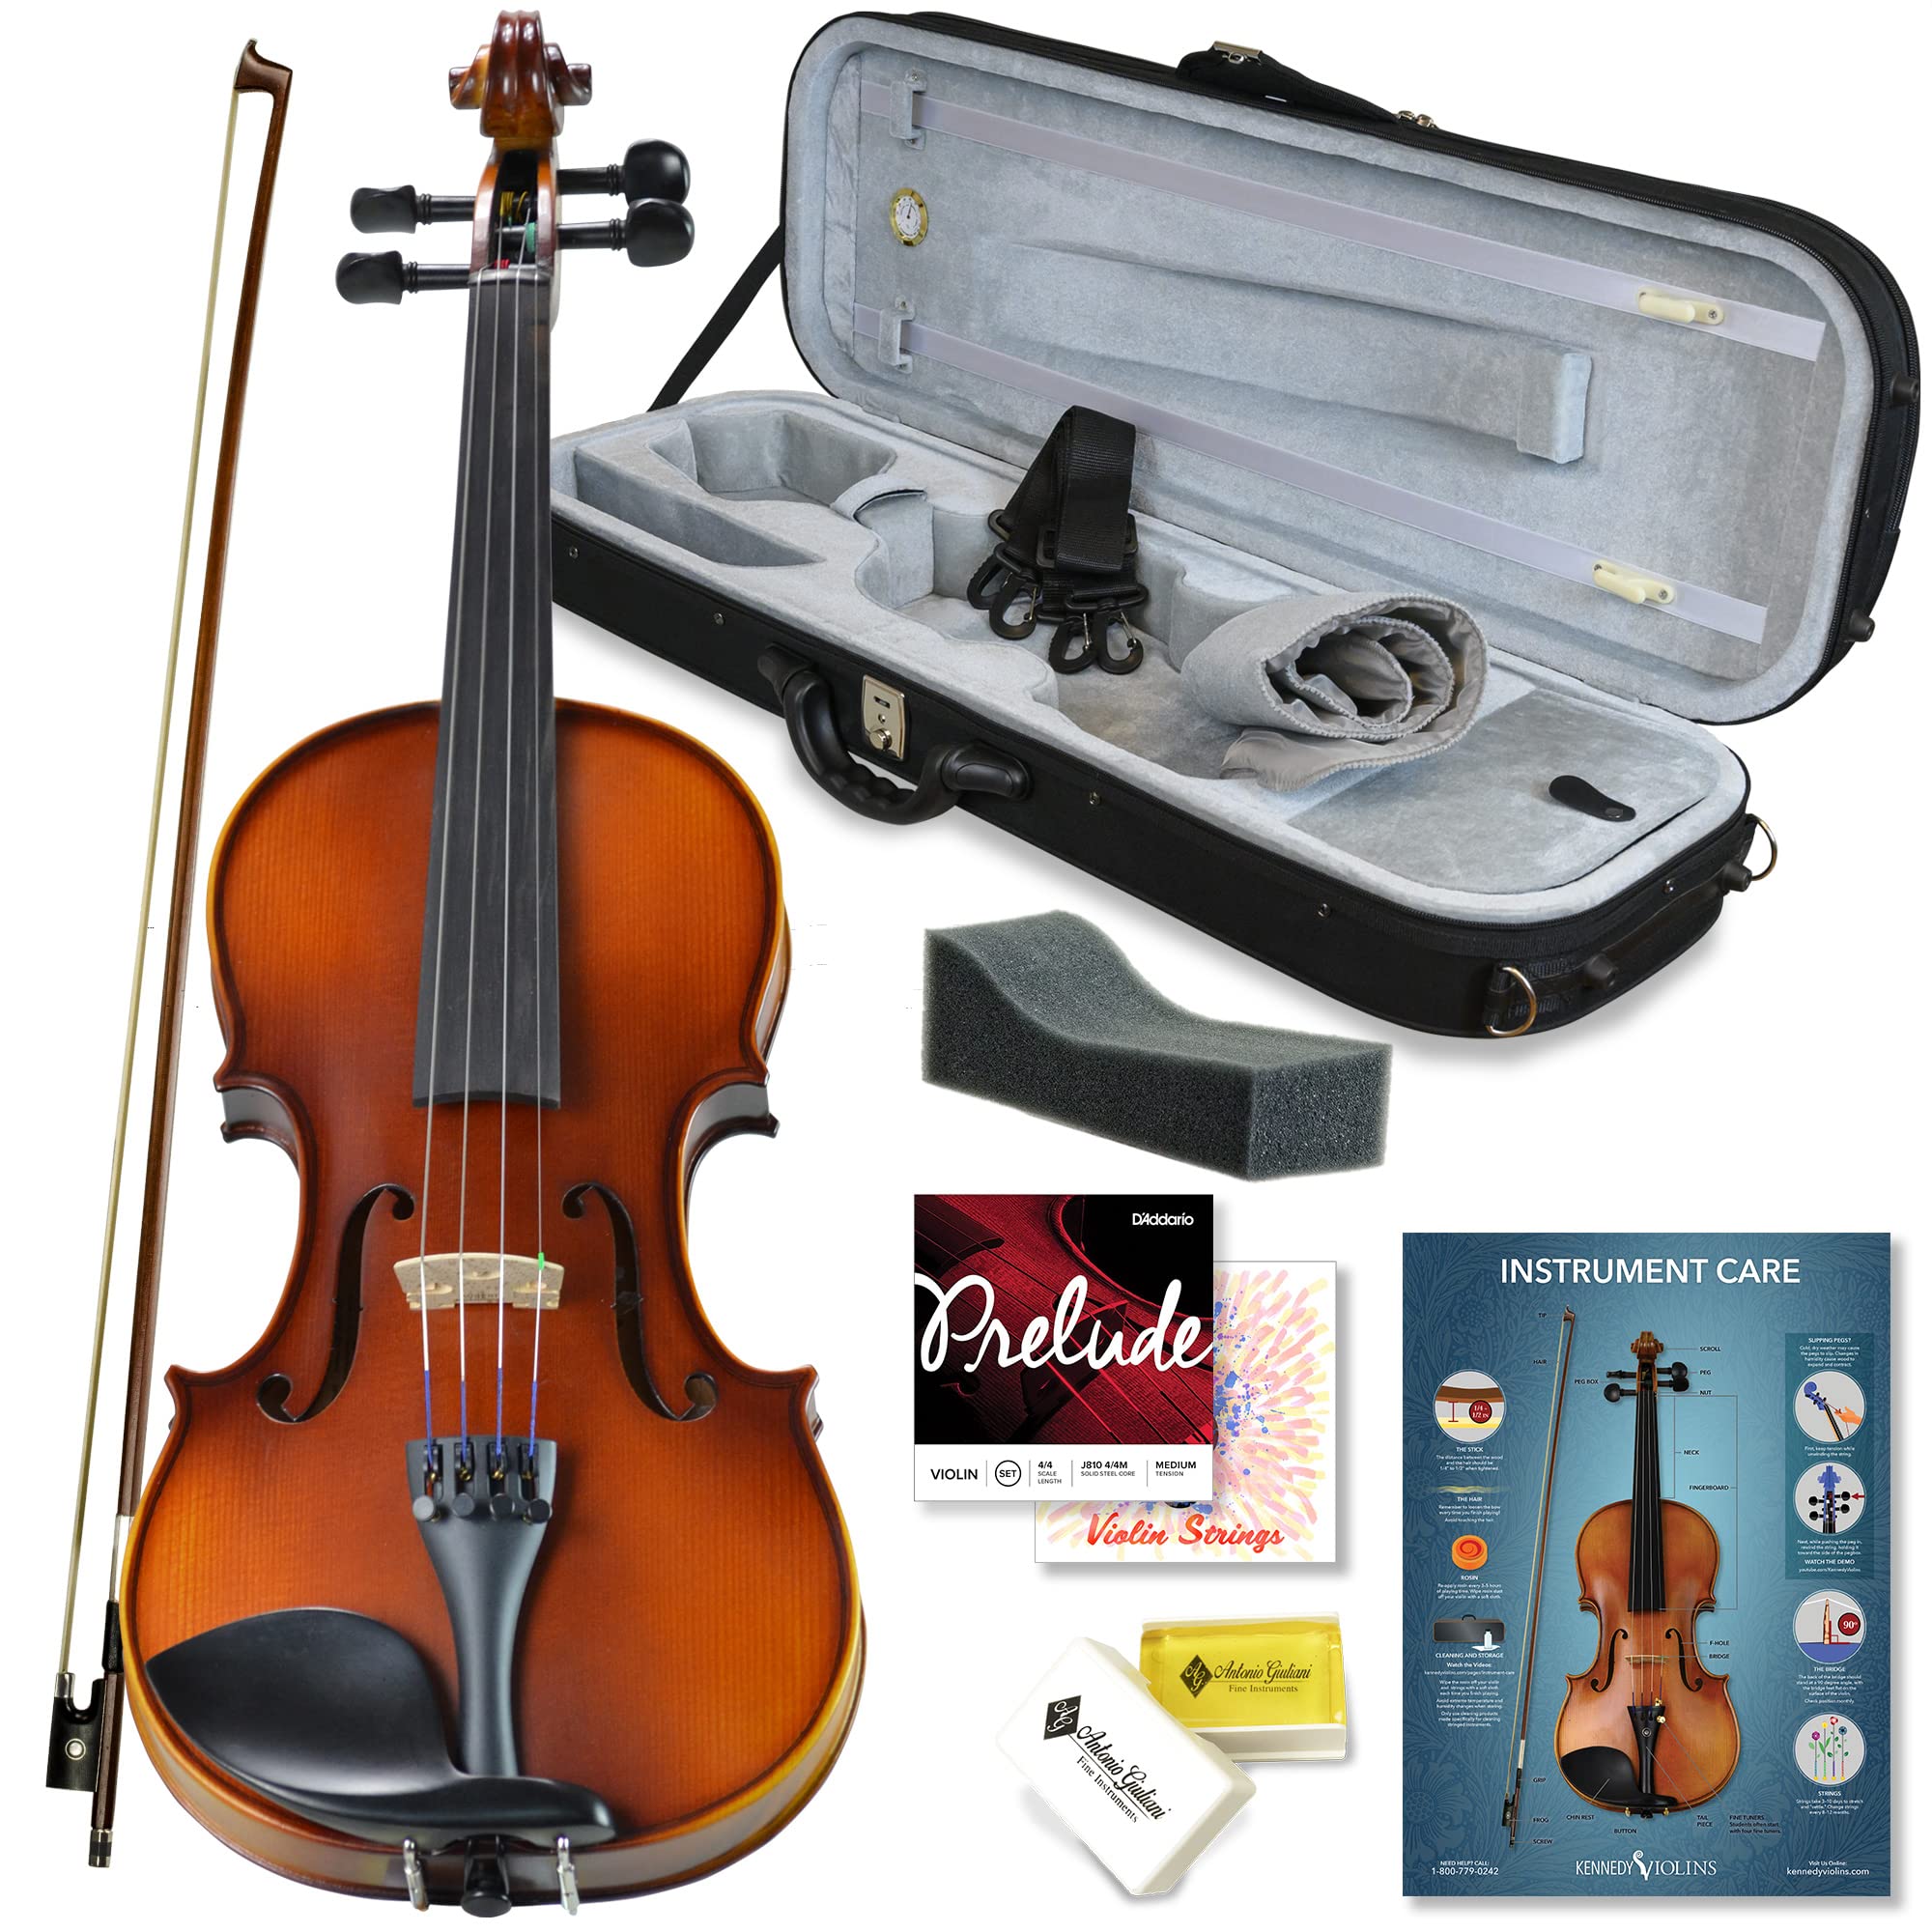 Kennedy Violins Bunnel Pupil Violin Outfit 110 Size By Kennedy Violins - carrying case and Accessories Included - Solid Maple Wood and E